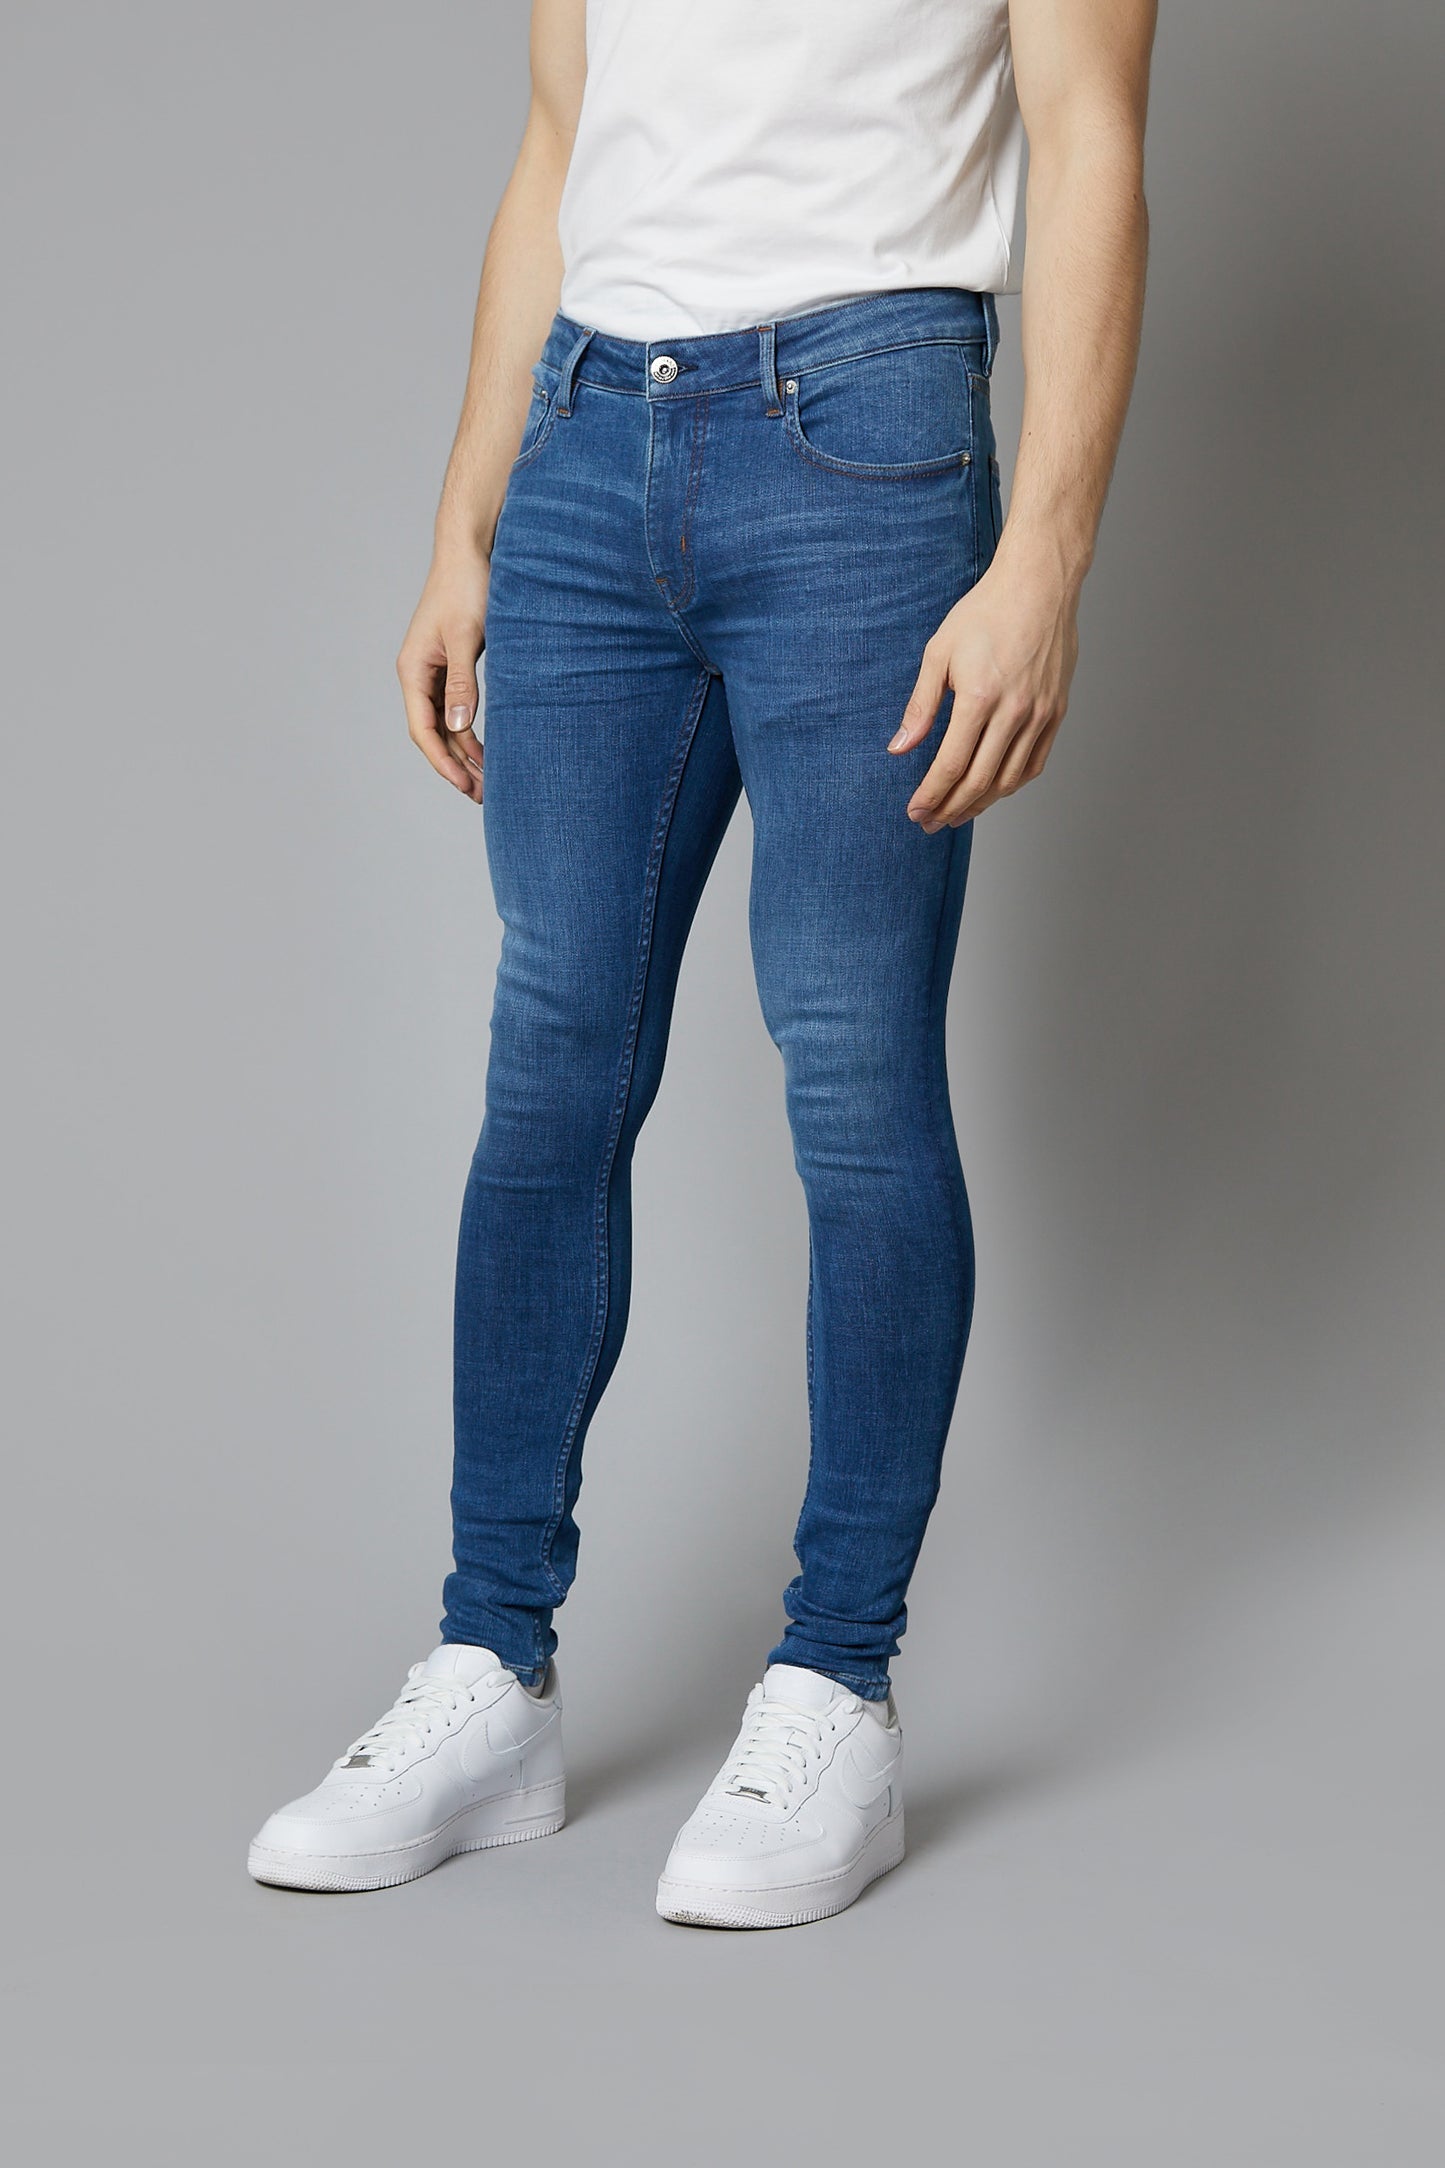 DML Jeans Colorado Super Skinny Fit Jeans In mid Blue